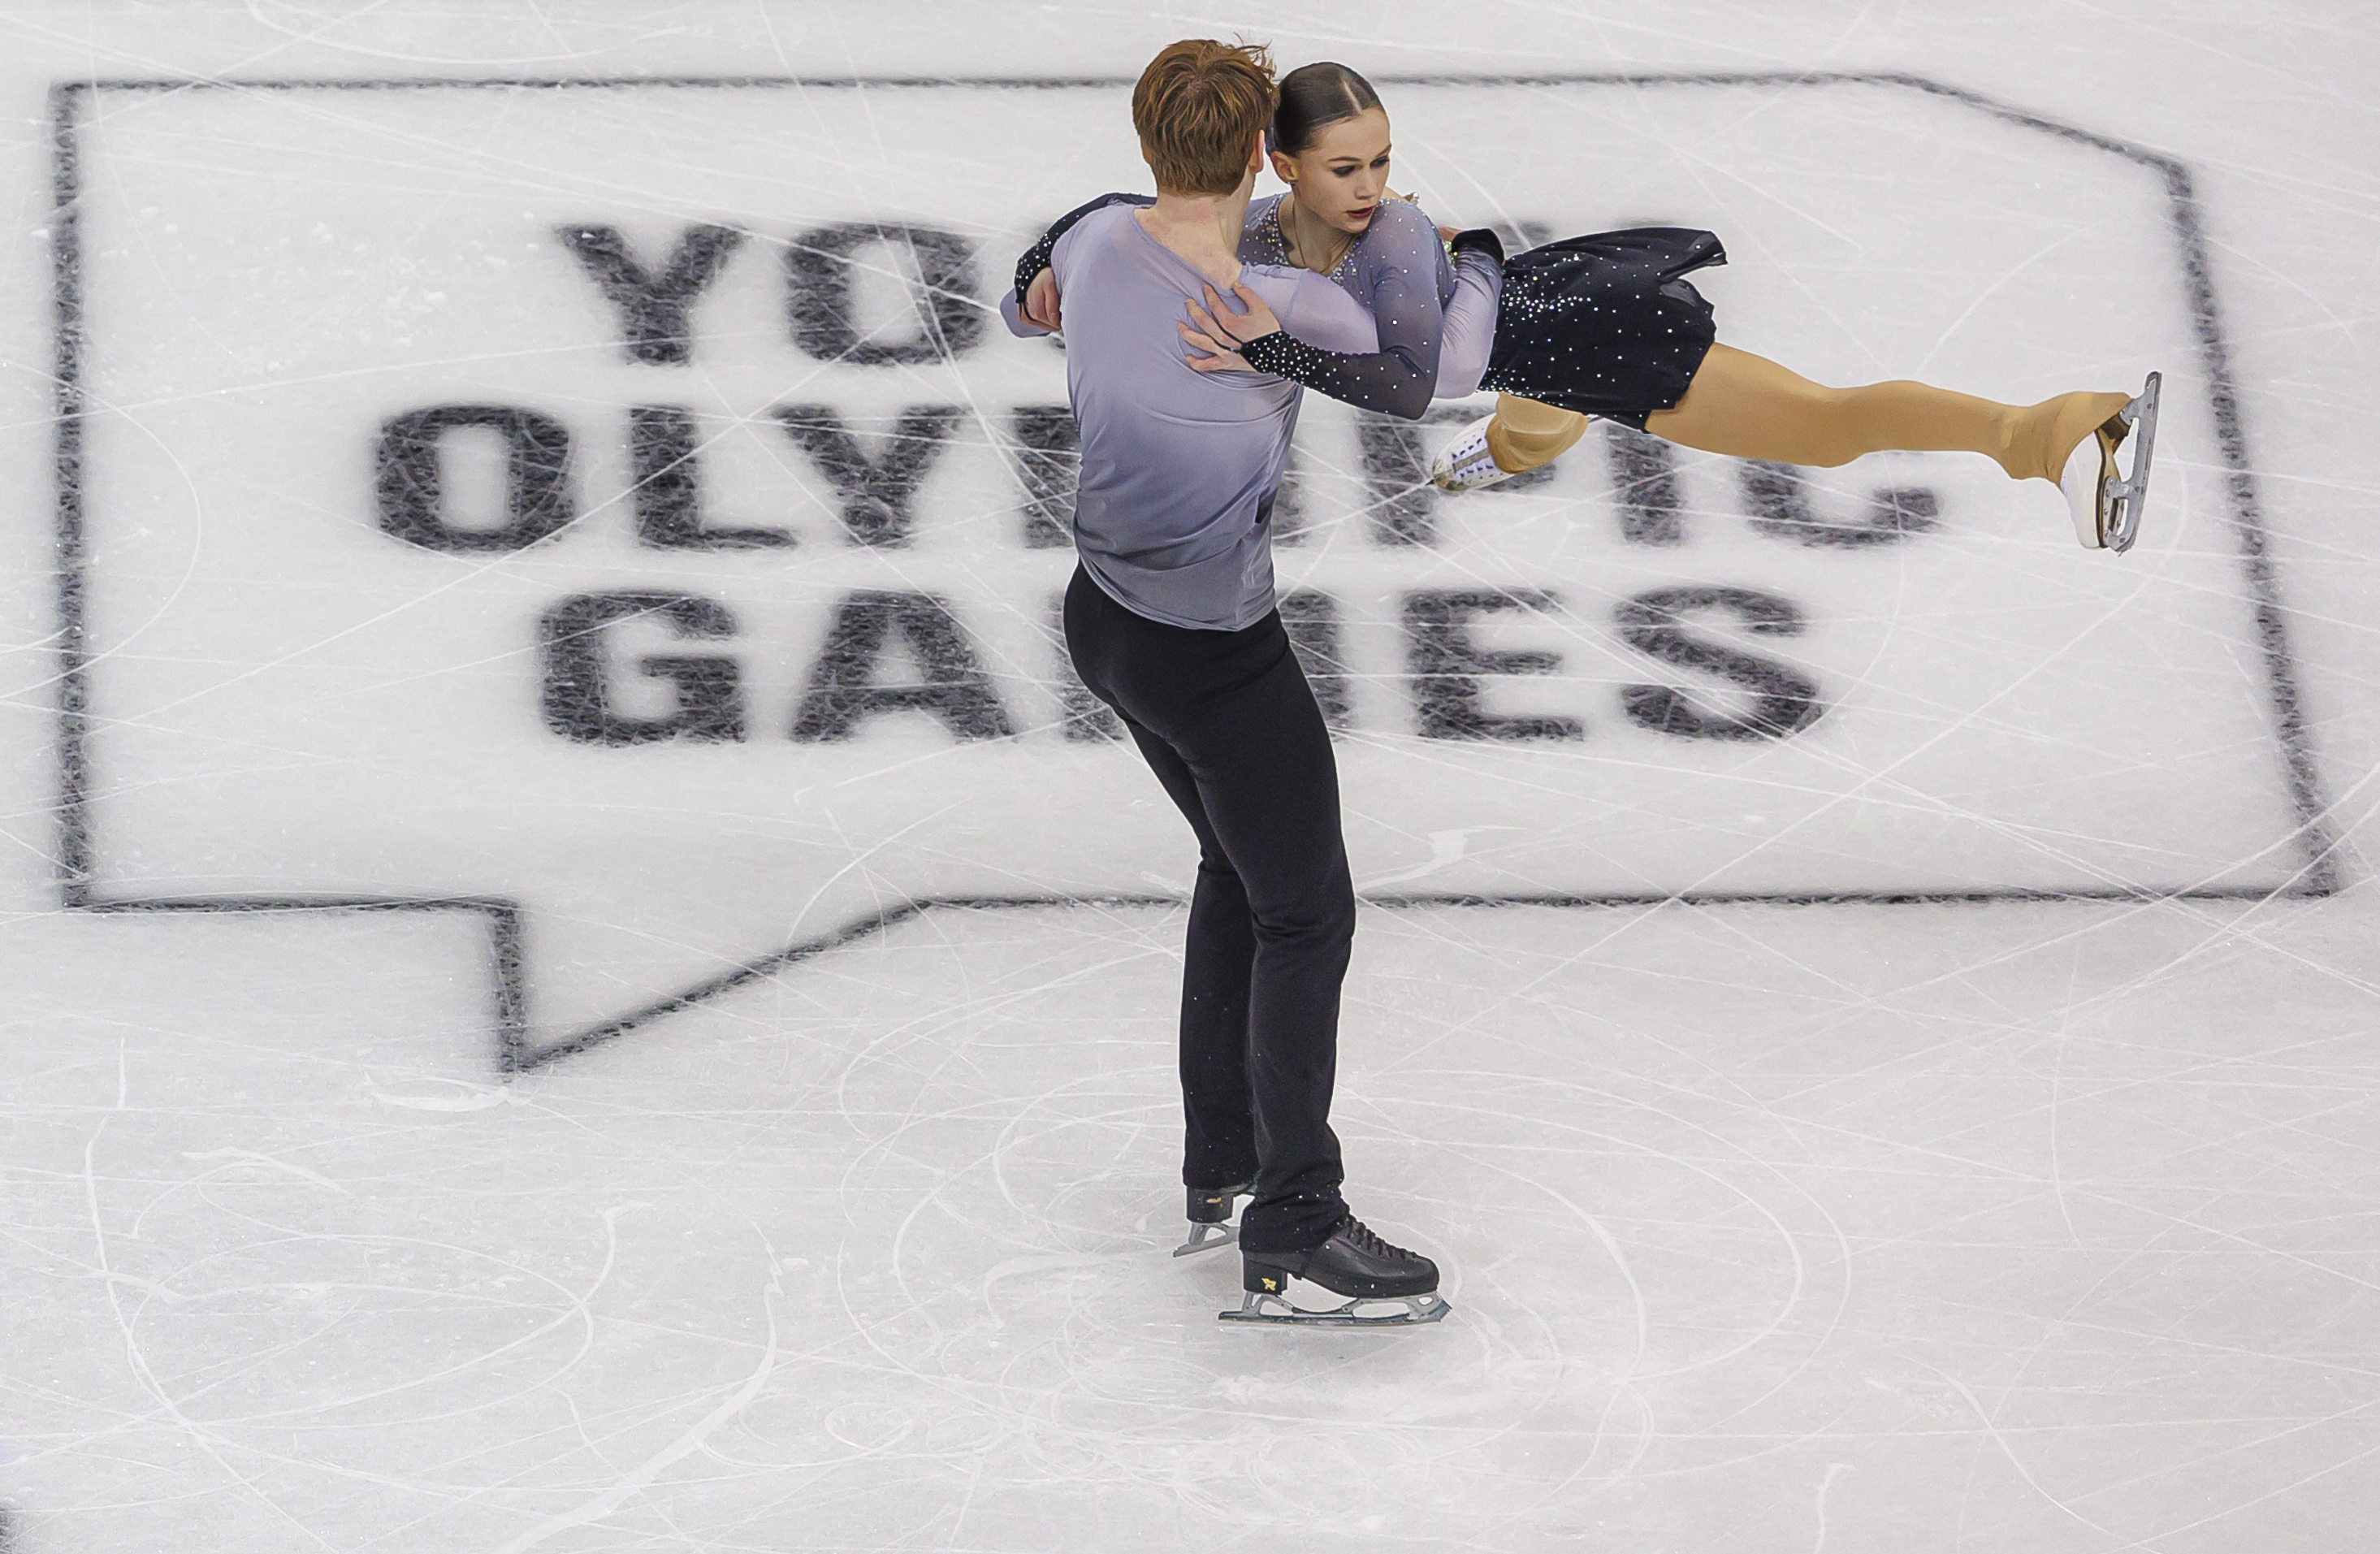 Cayla Smith (USA) and Jared Mcpike (USA) during their routine in the Pairs Free Skating at the Gangneung Ice Arena on Monday